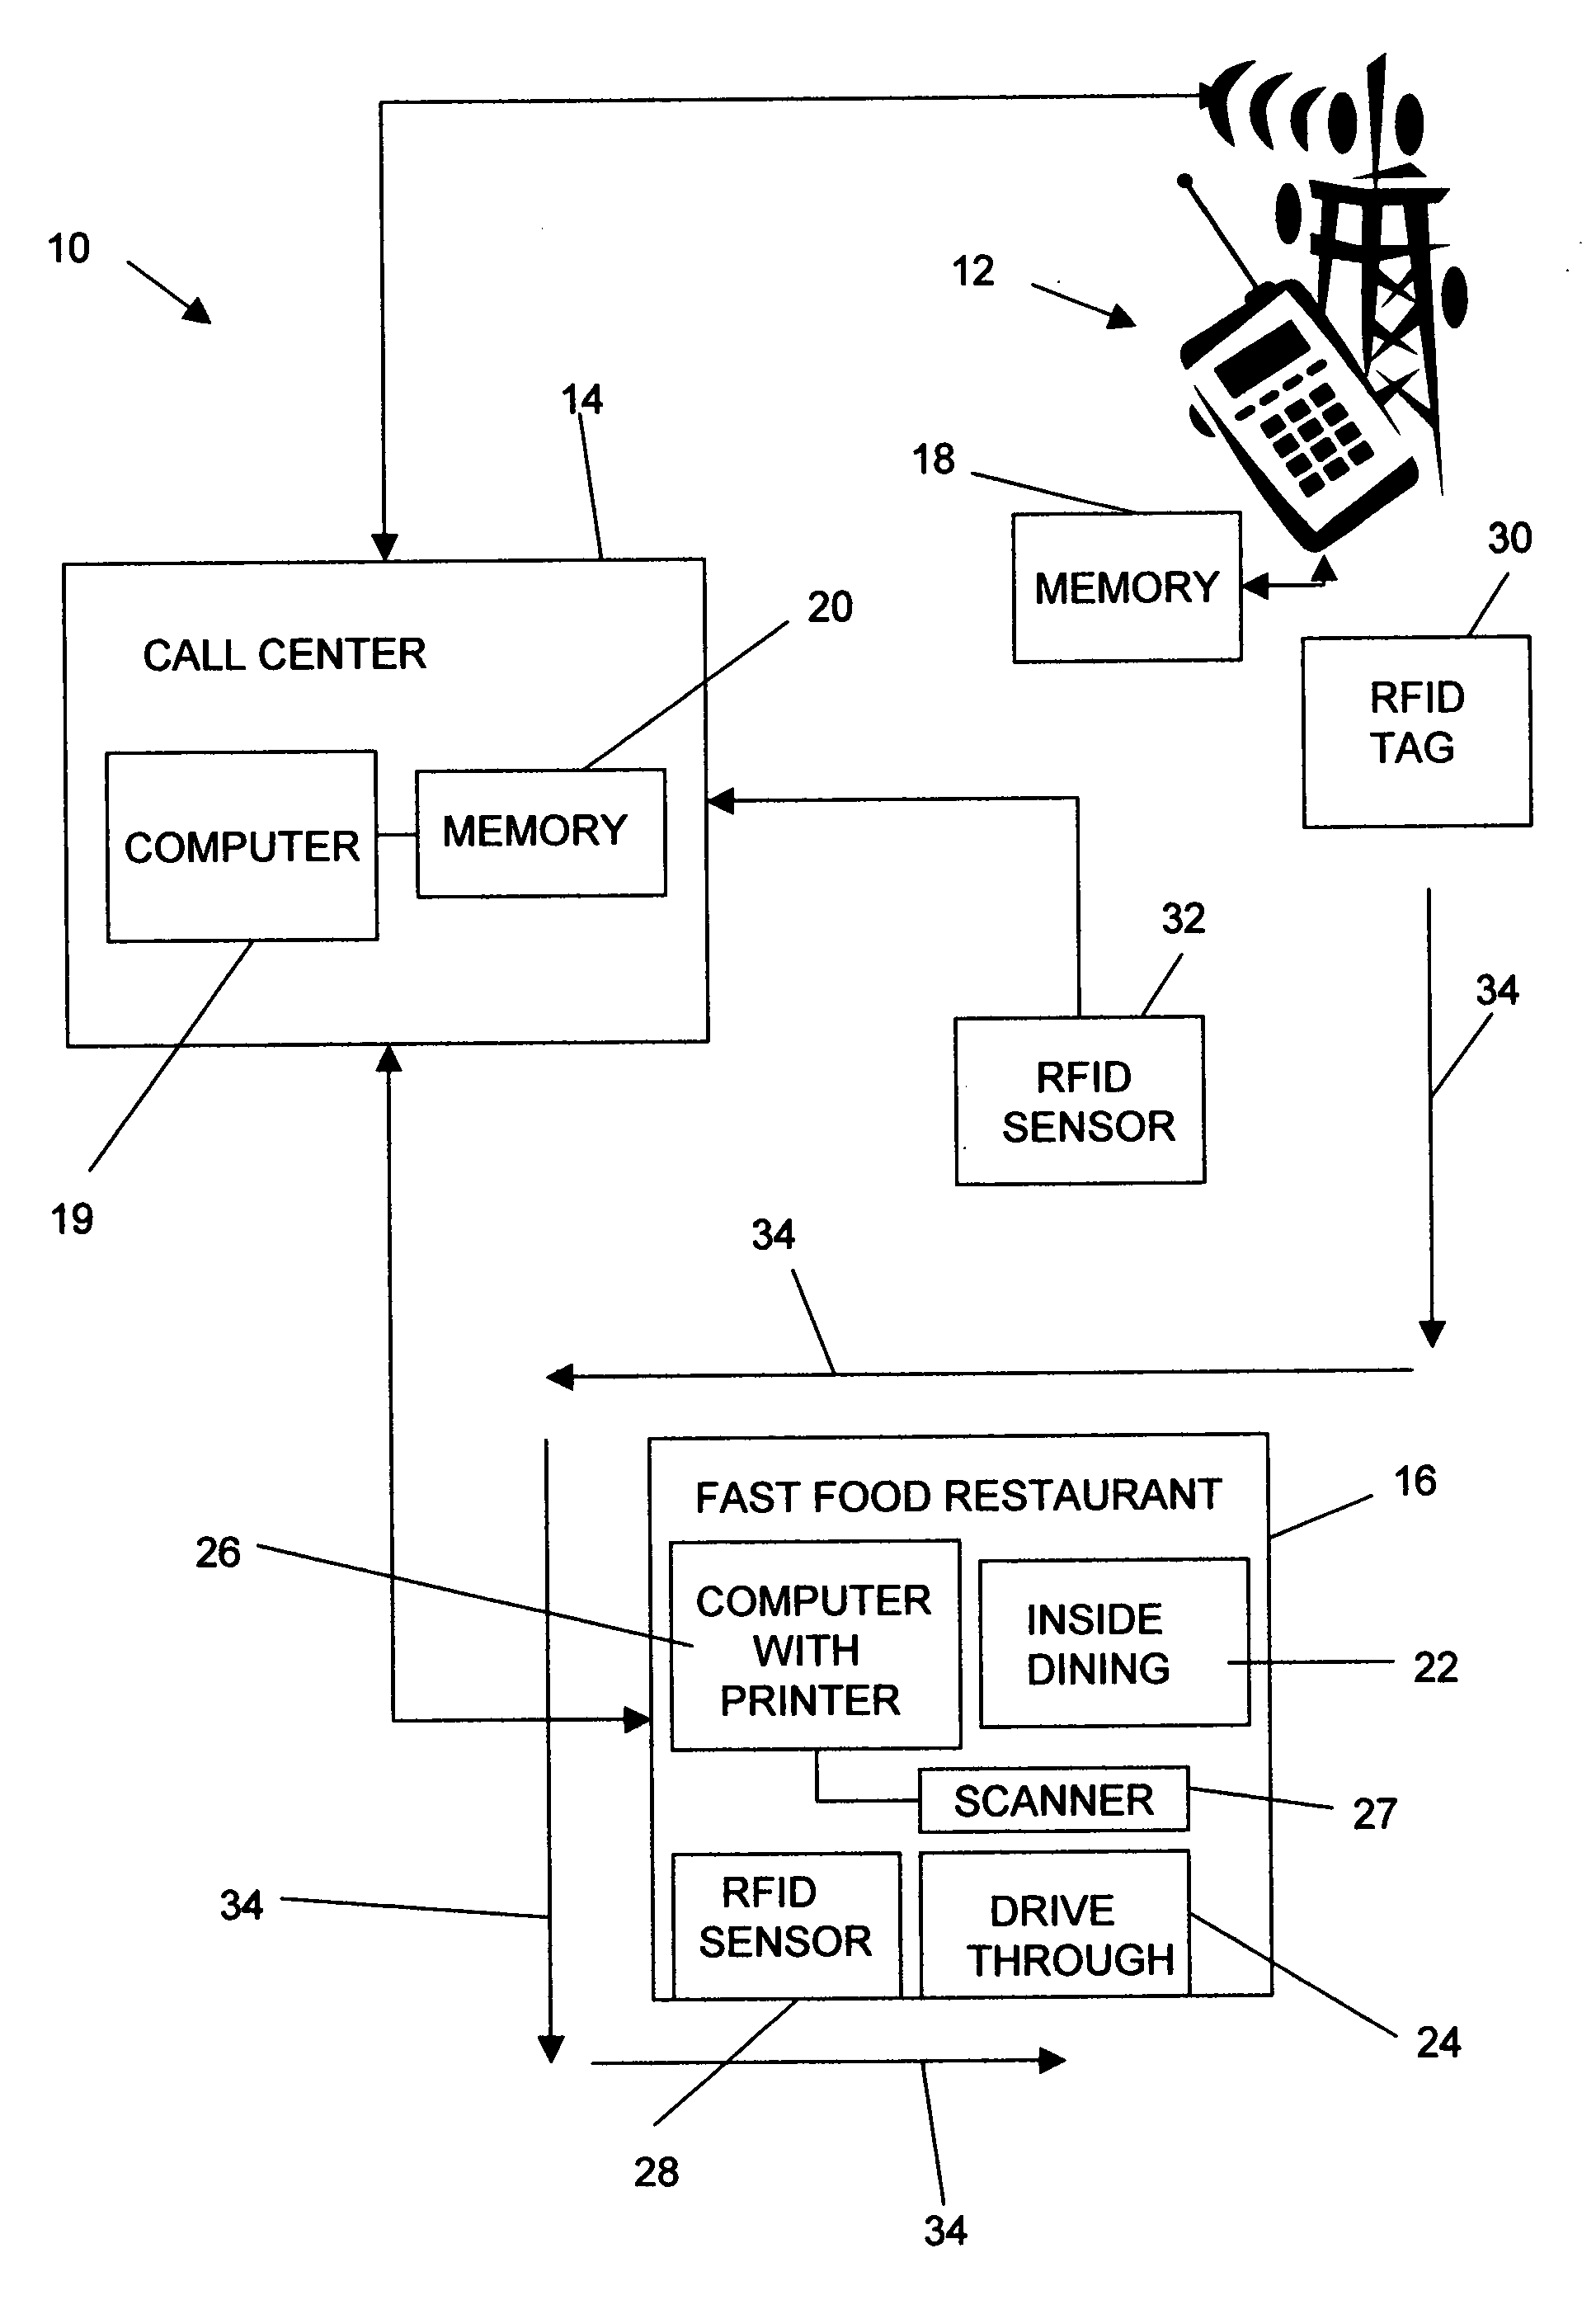 Merchandise ordering system using a cell phone